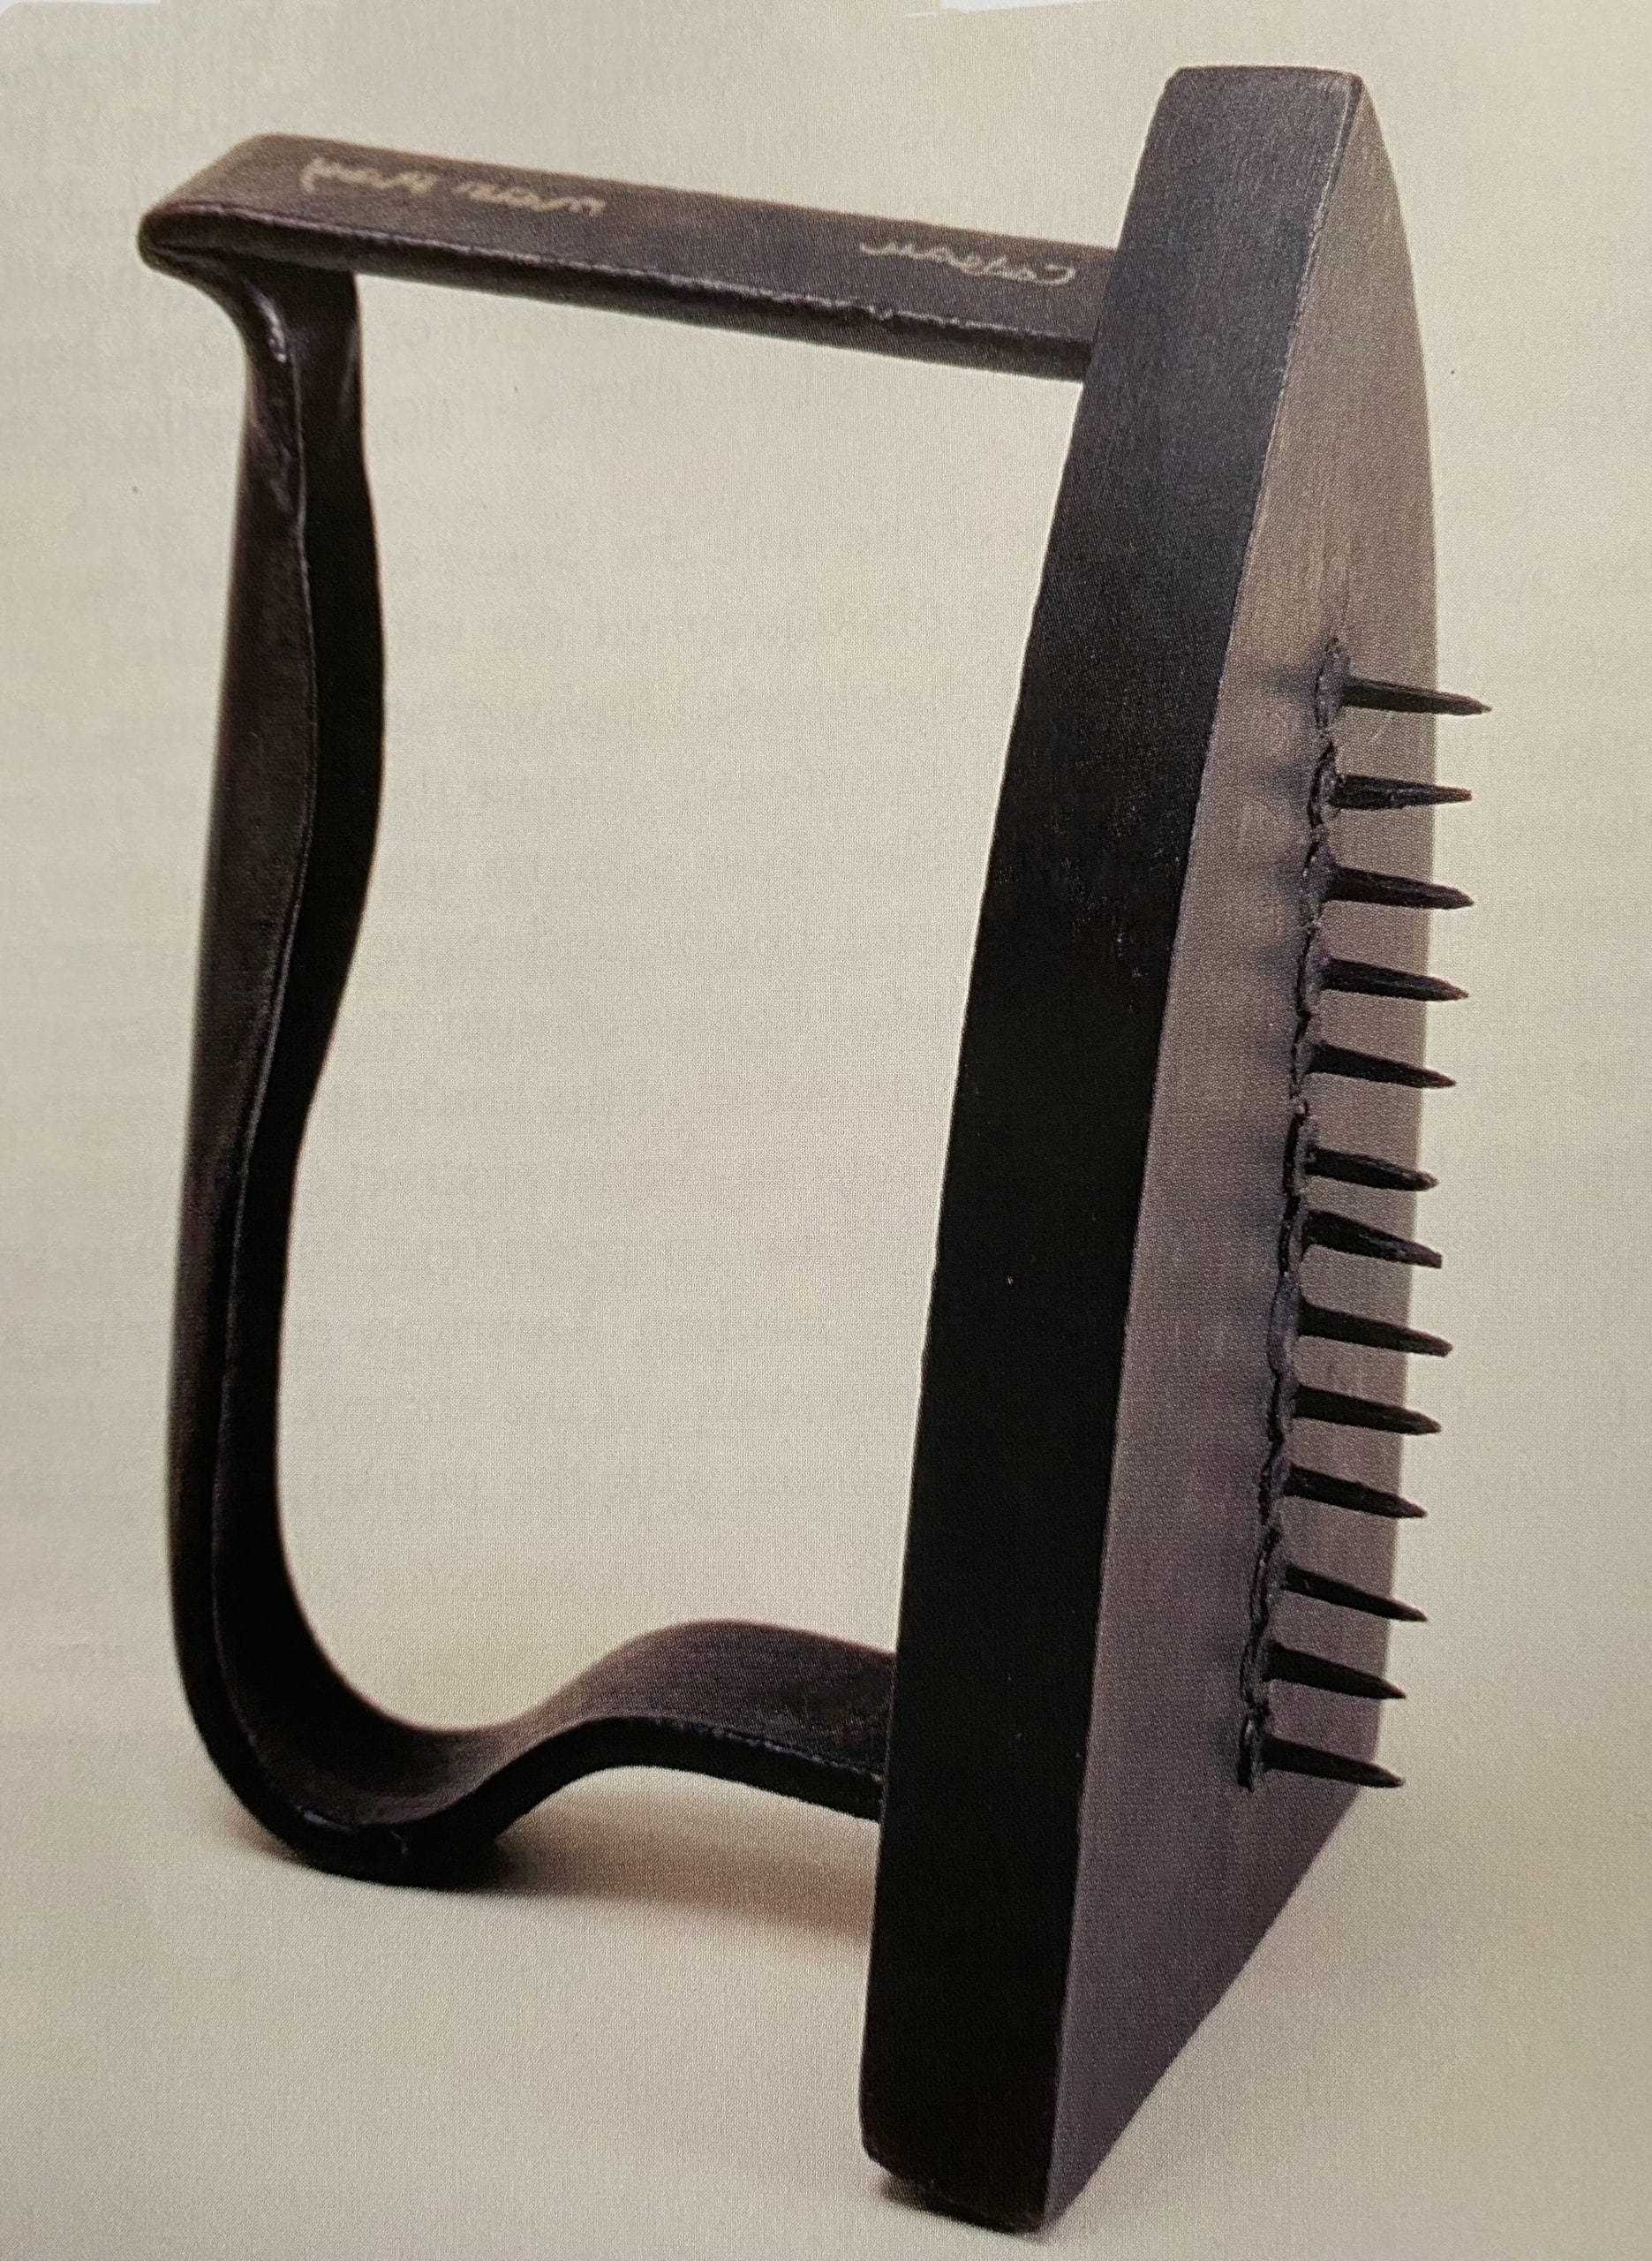 Cadeau (The-Gift) sculpture by Man Ray